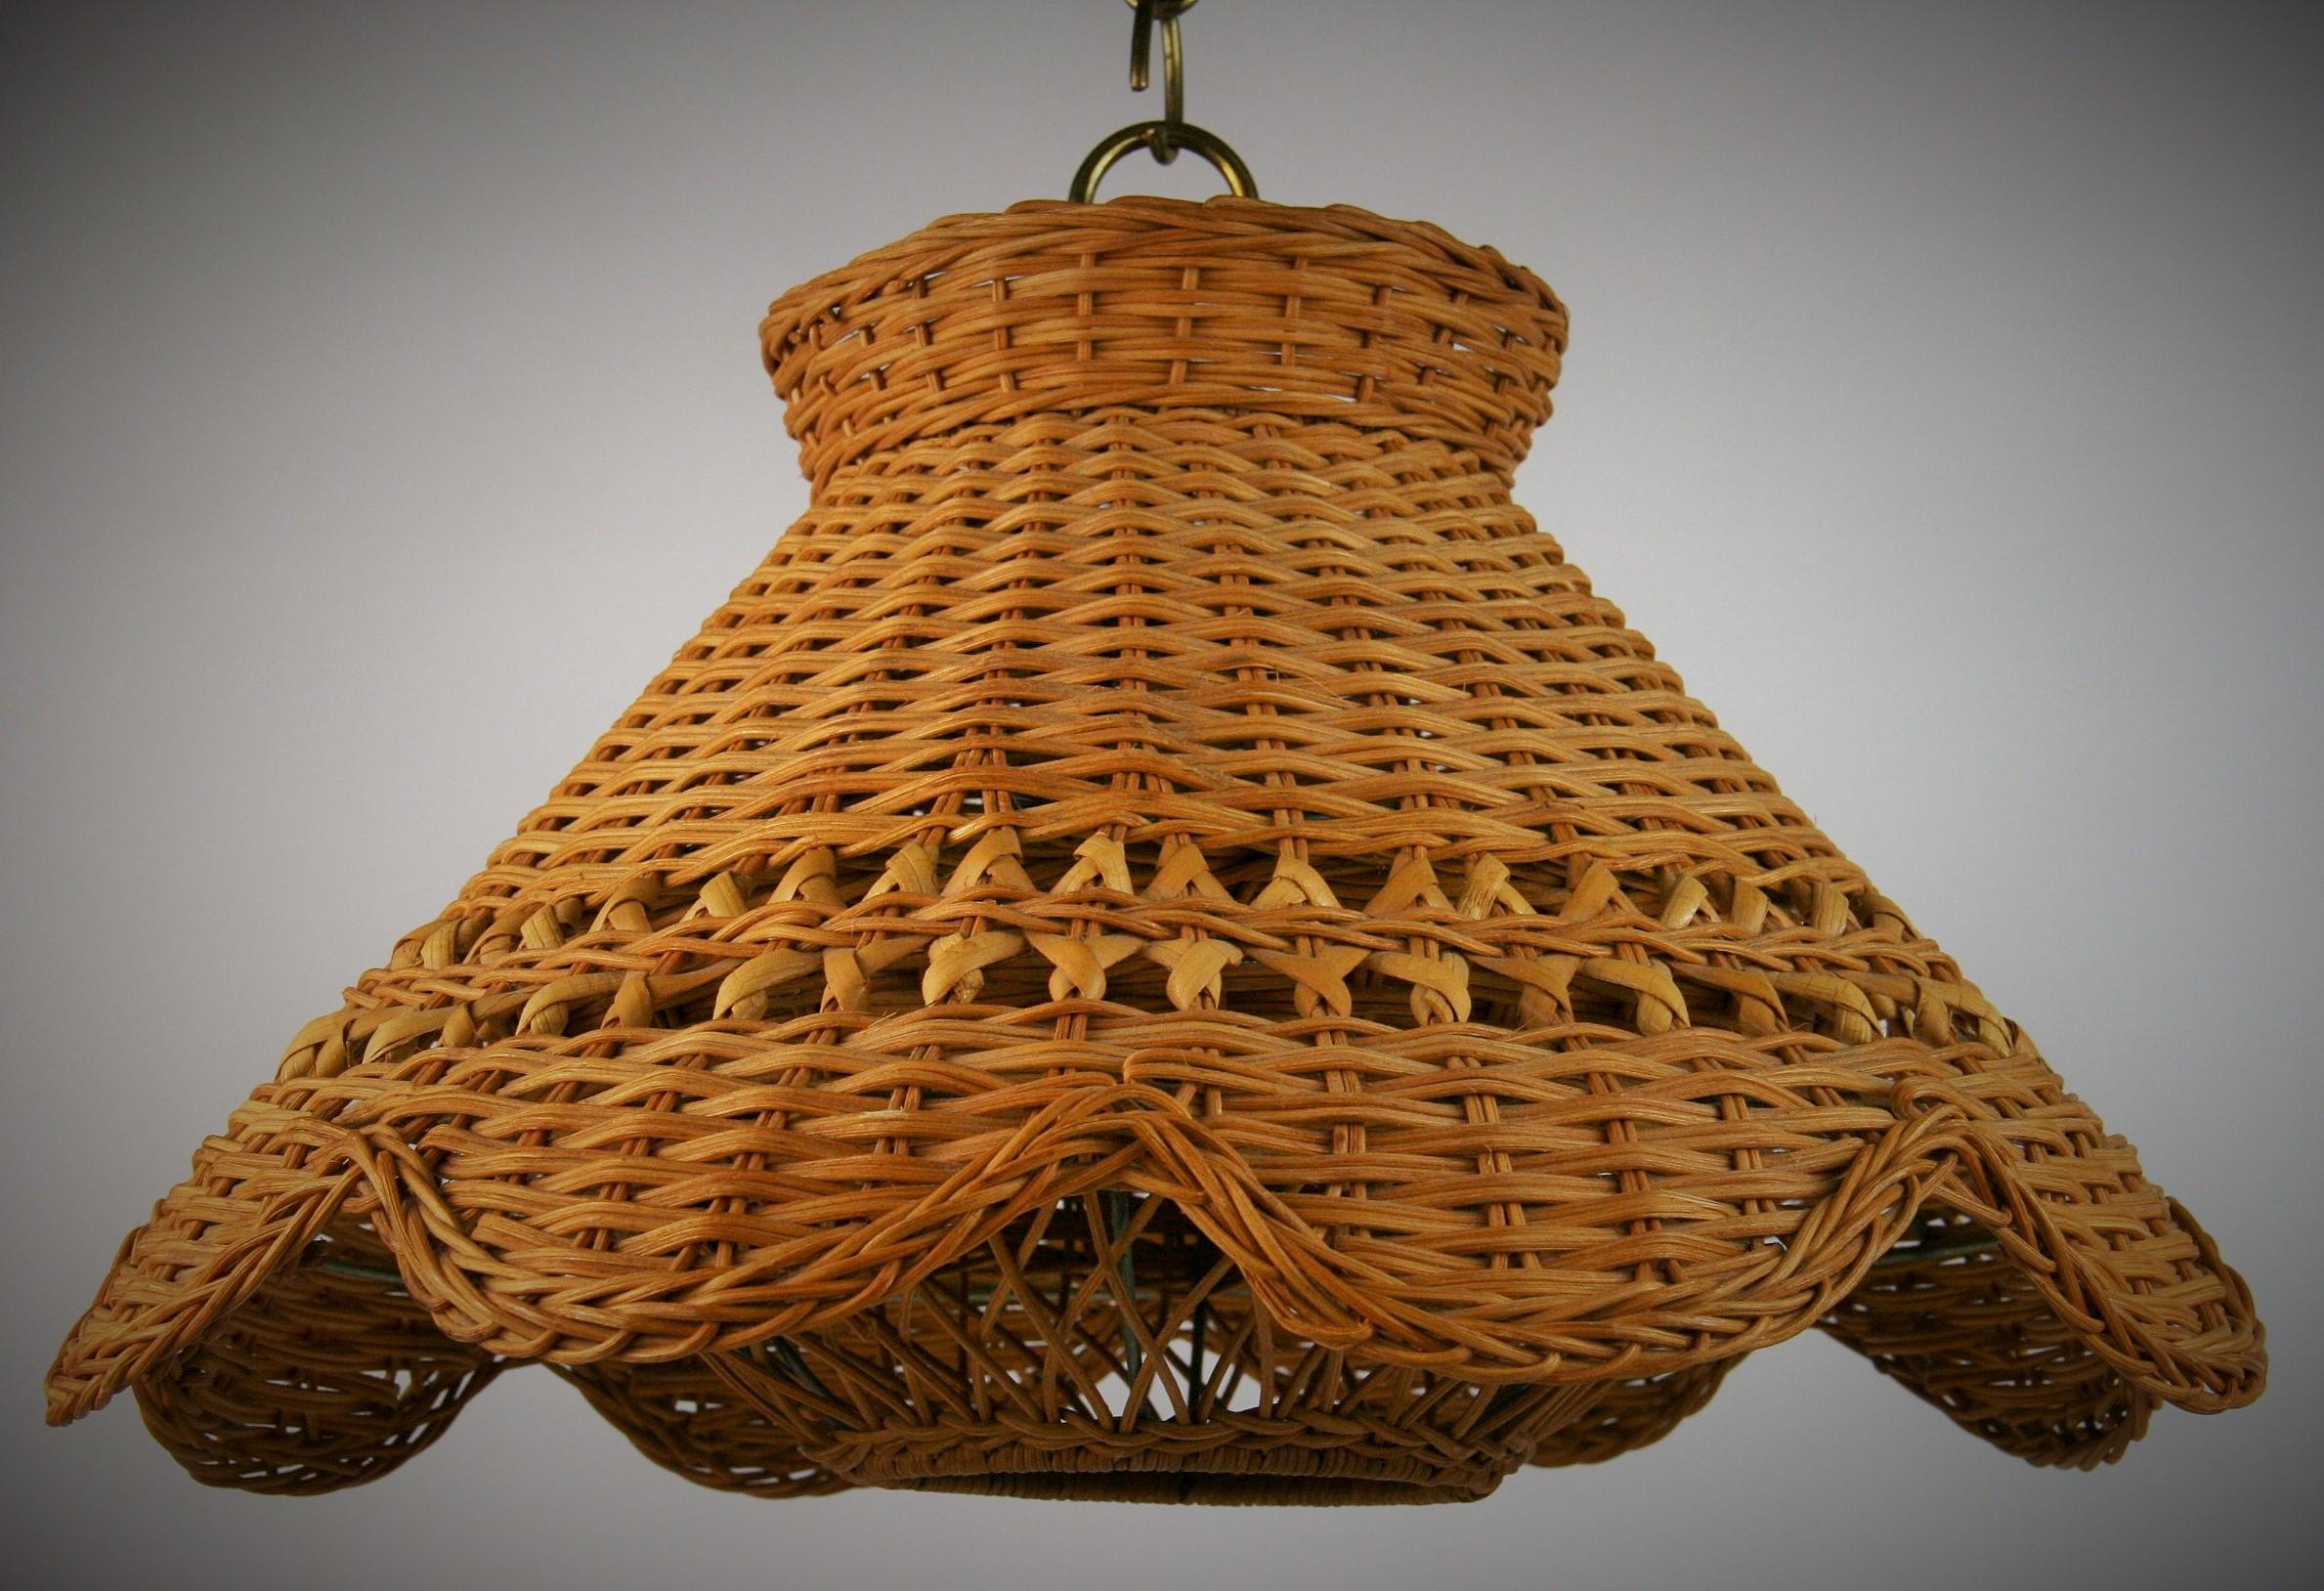 3-424 Scalloped wicker pendant light with internal wicker baffle 
Takes one Edison based bulb 100 watt max
Rewired
Supplied with chain and canopy.